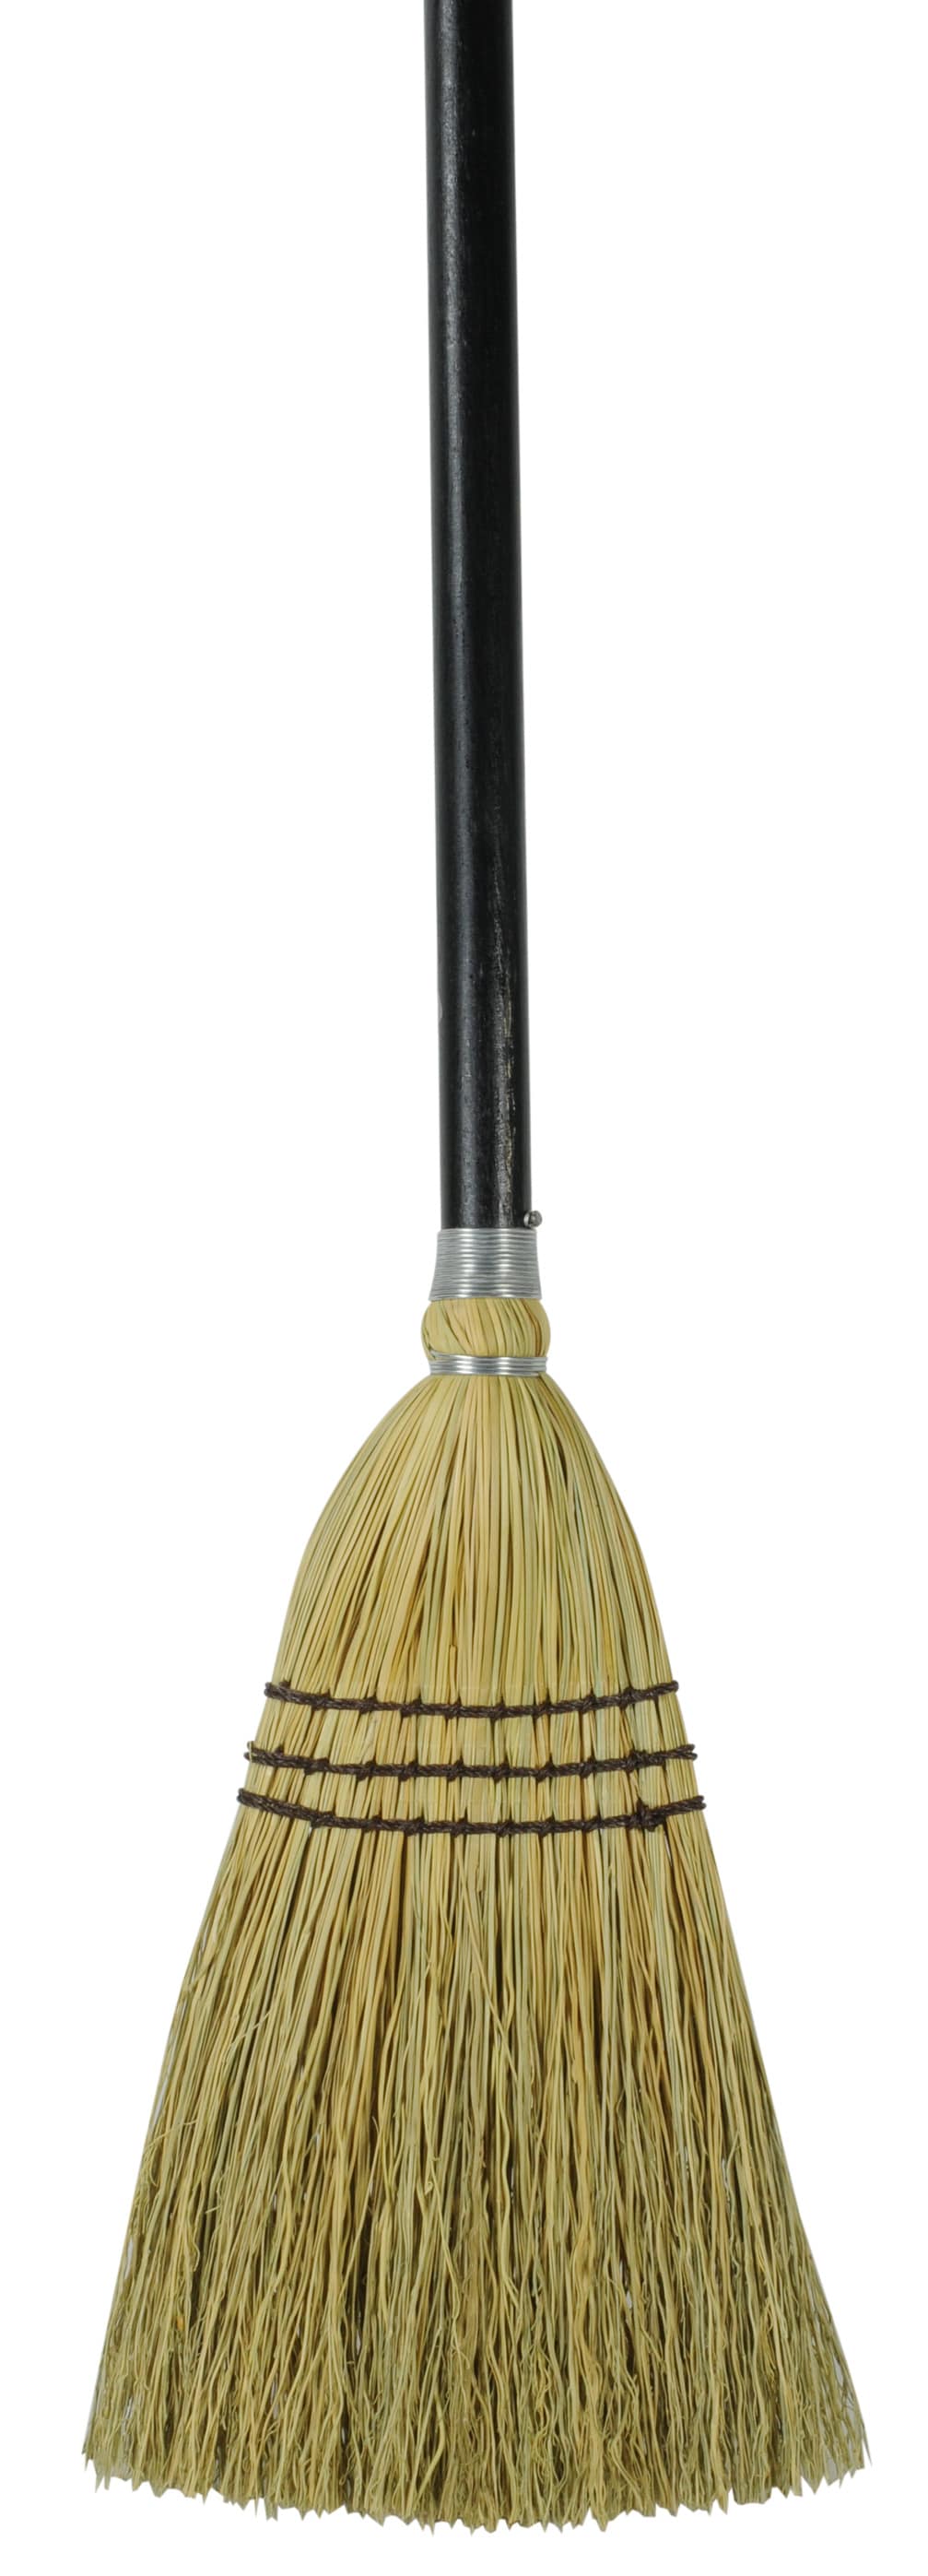 Rubbermaid Commercial 12 inch Corn Whisk Broom, Yellow, Flagged Natural Bristles for Multi-Surface Sweeping, Remove Dirt and Debris from Porches